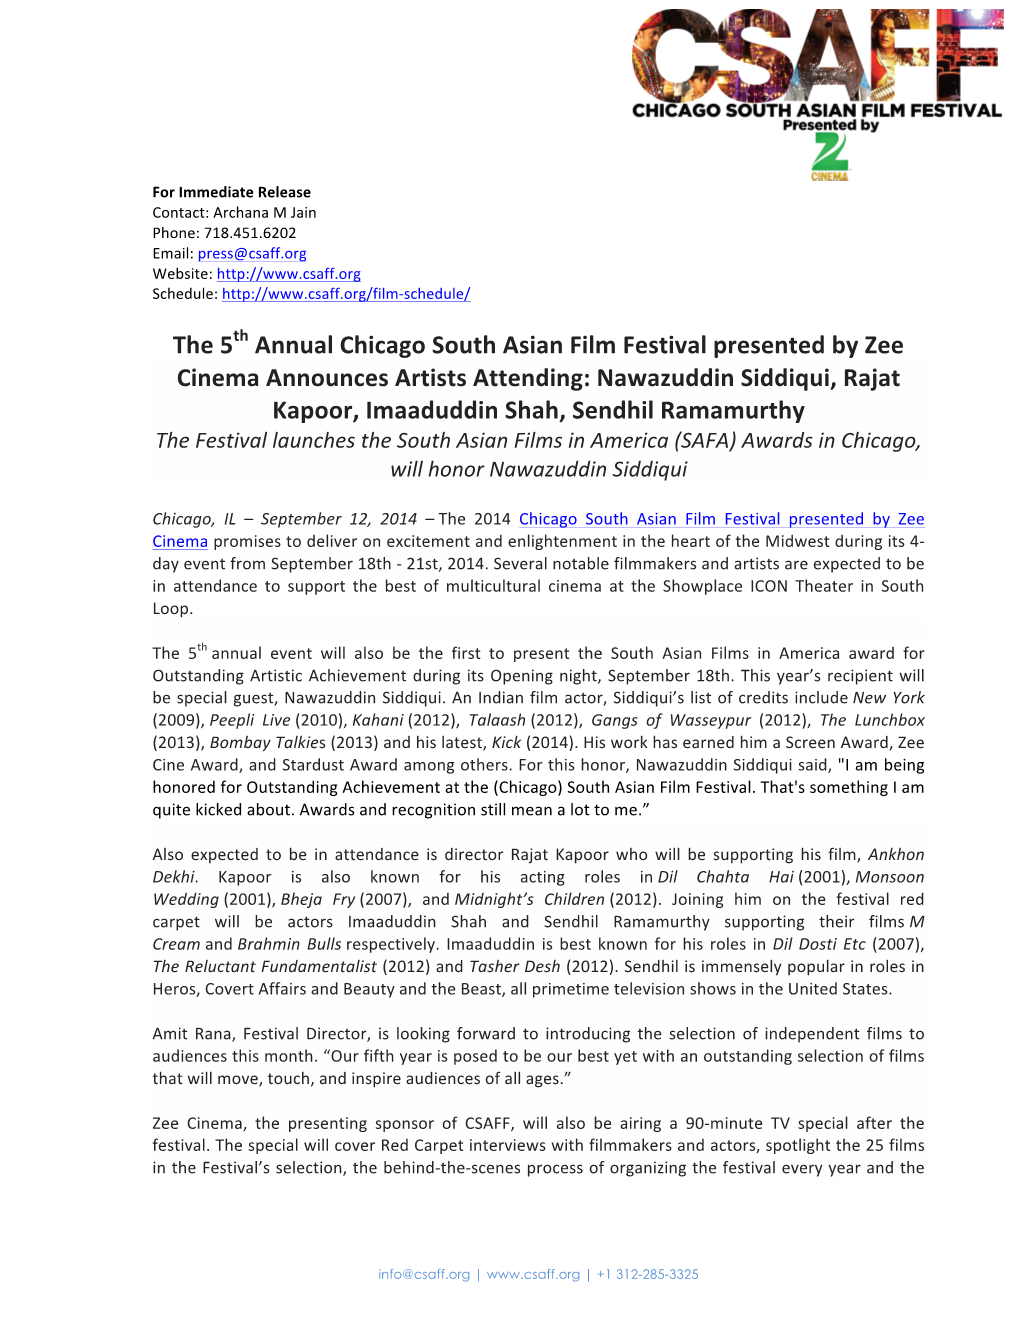 Sep 12, 2014 – the 5Th Annual Chicago South Asian Film Festival